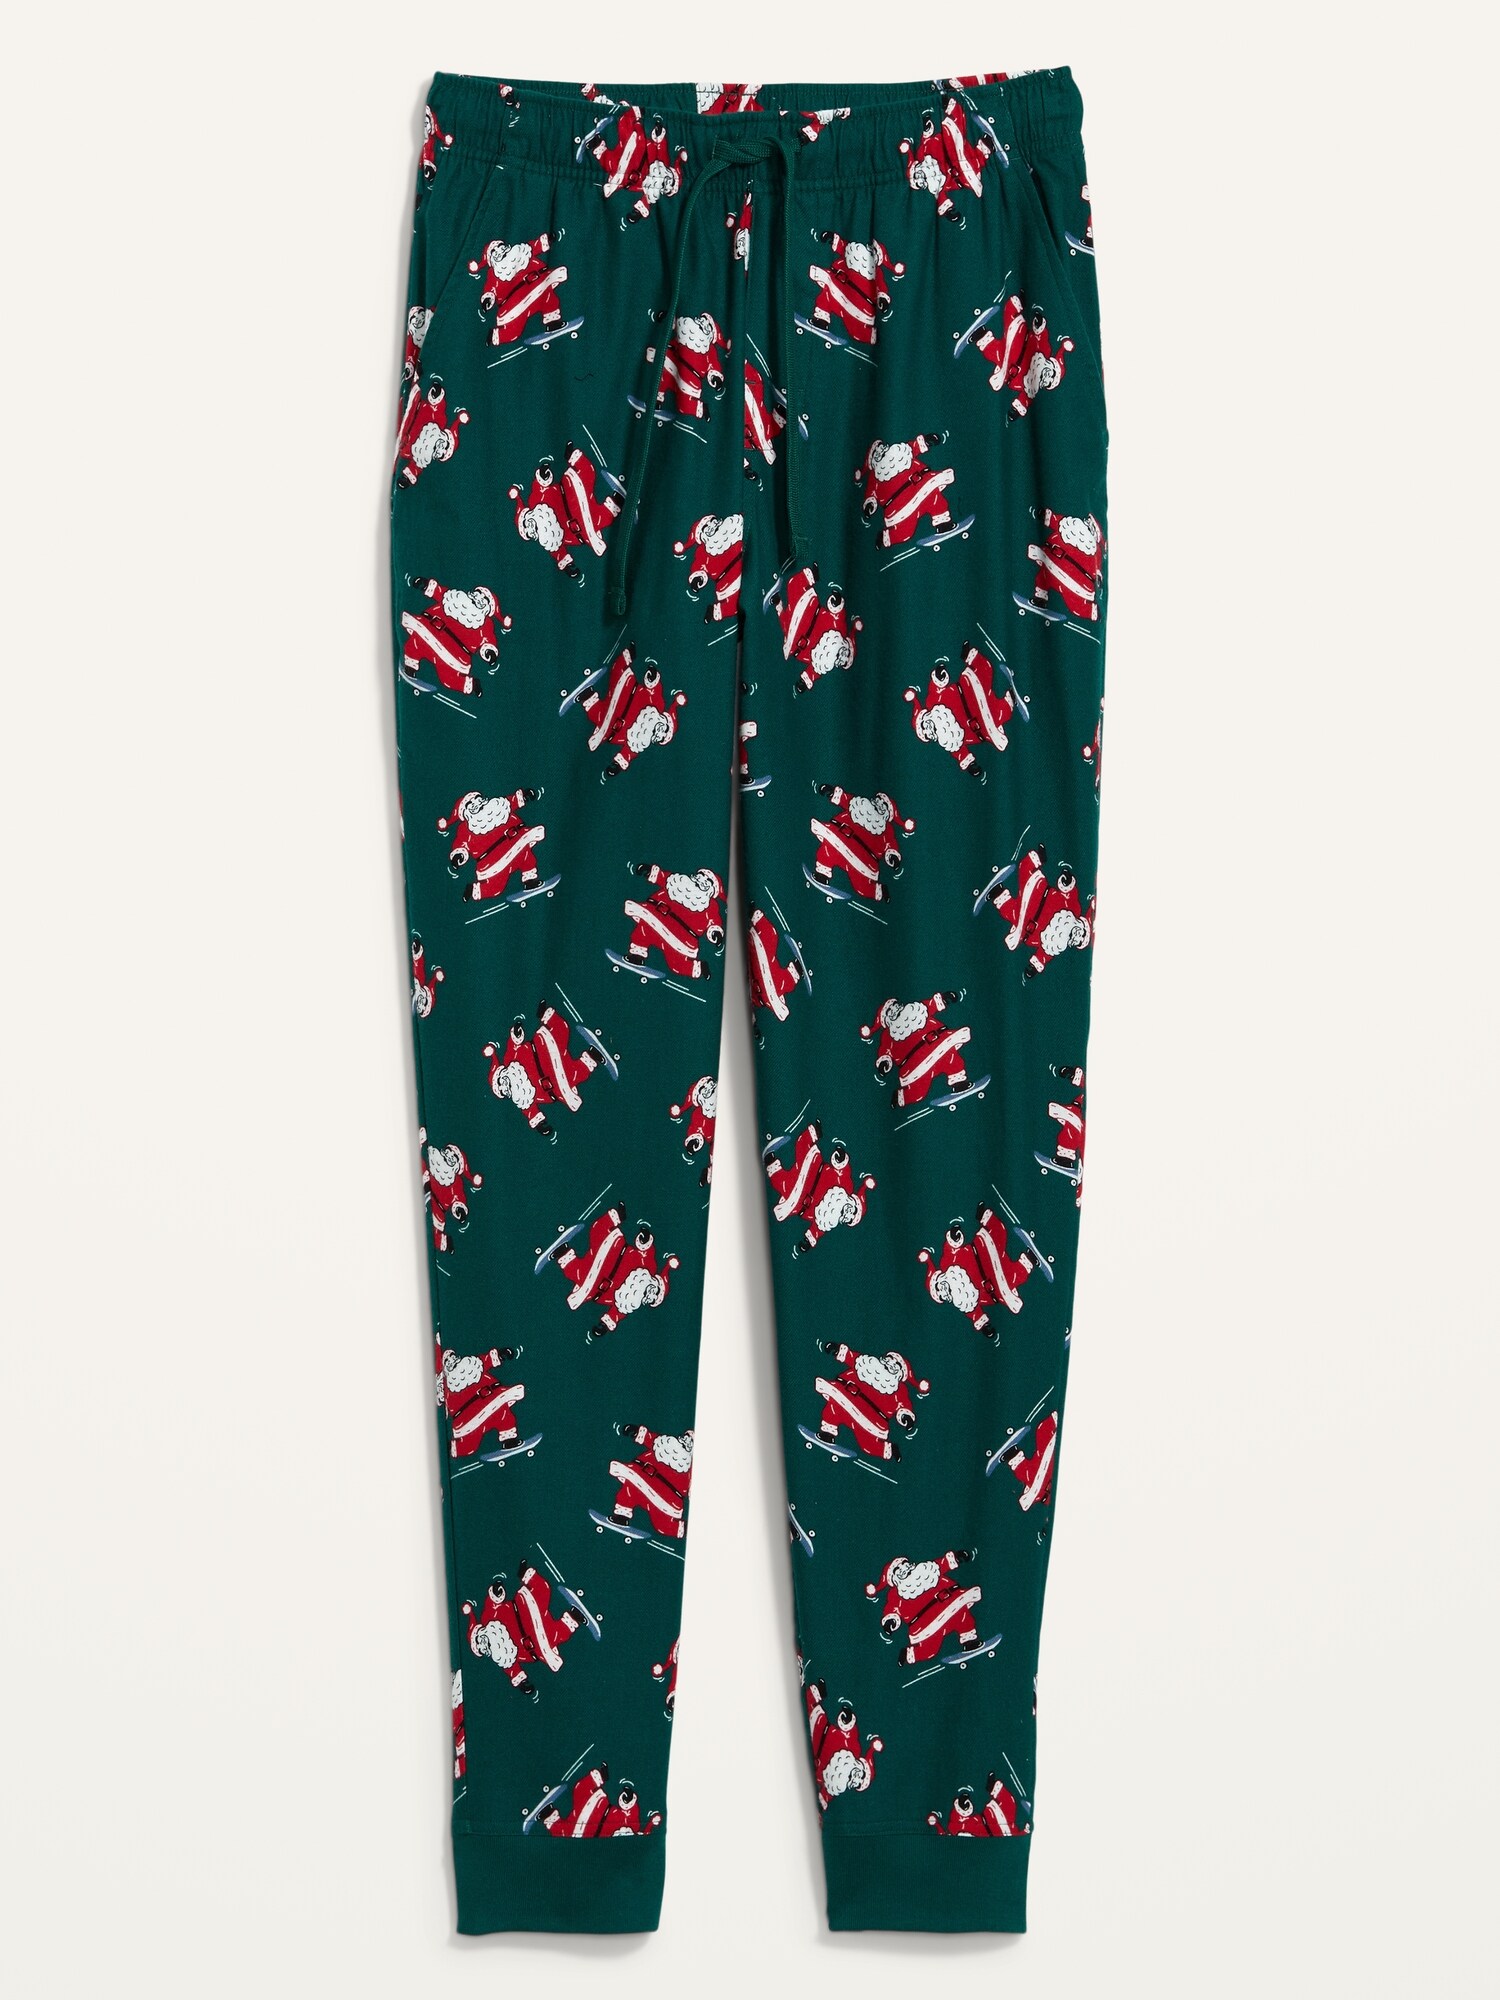 Matching Printed Flannel Jogger Pajama Pants for Men | Old Navy